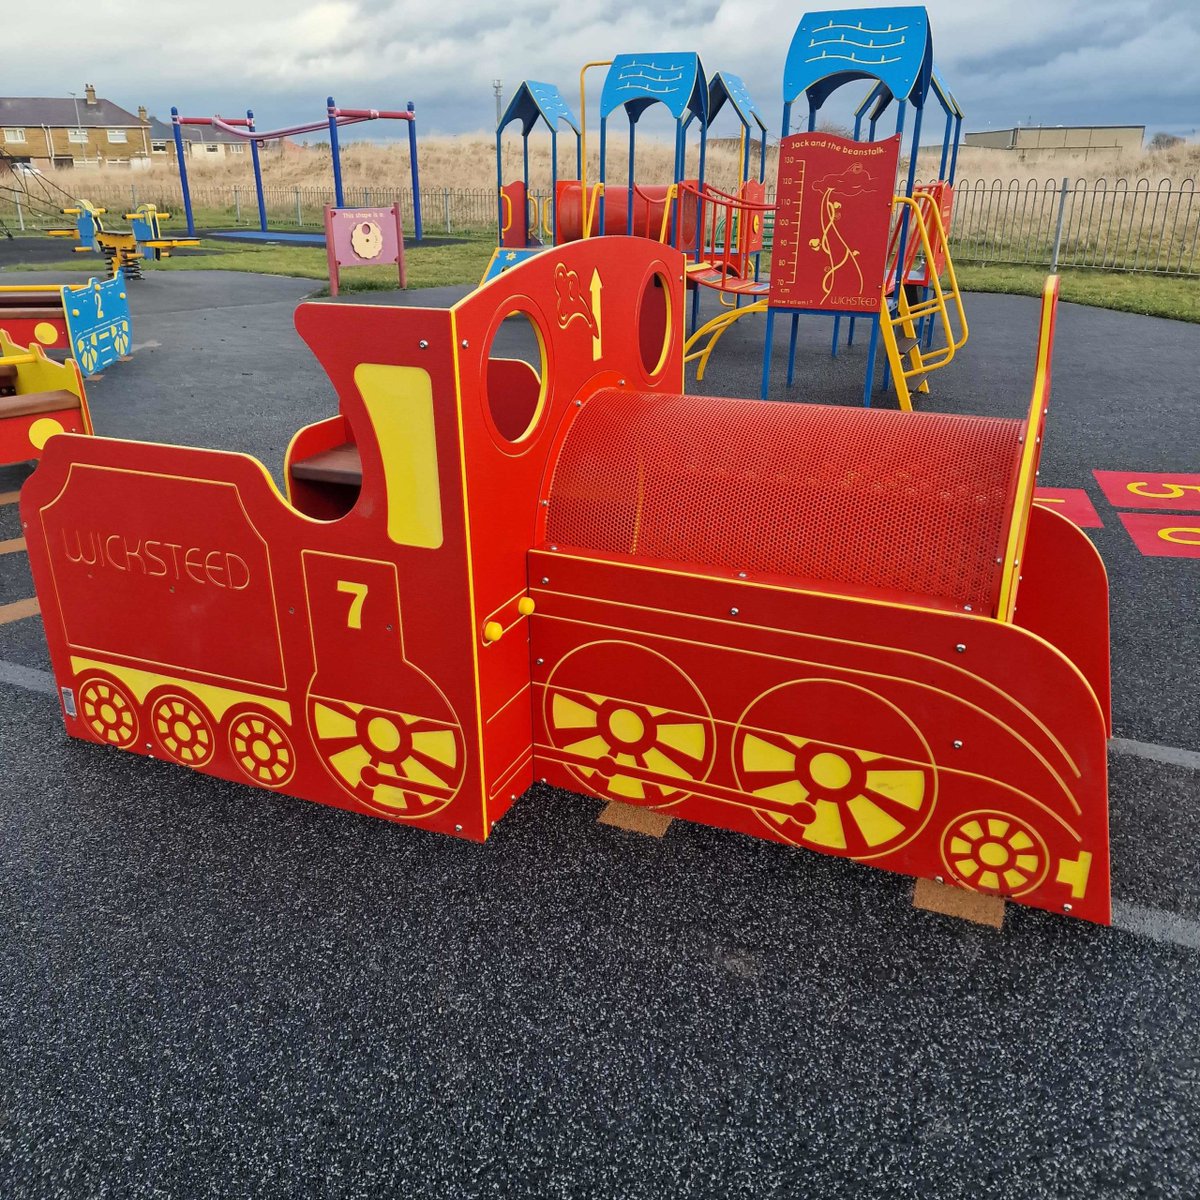 🚨 Community Alert: Central Play Area Vandalism 

We regret to inform you that our Central Play Area experienced vandalism on Wednesday, May 1st. For more information please visit newbiggintowncouncil.gov.uk/news/
#CommunityAlert #Vandalism #Newbiggin #Newbigginbythesea #SafeCommunities